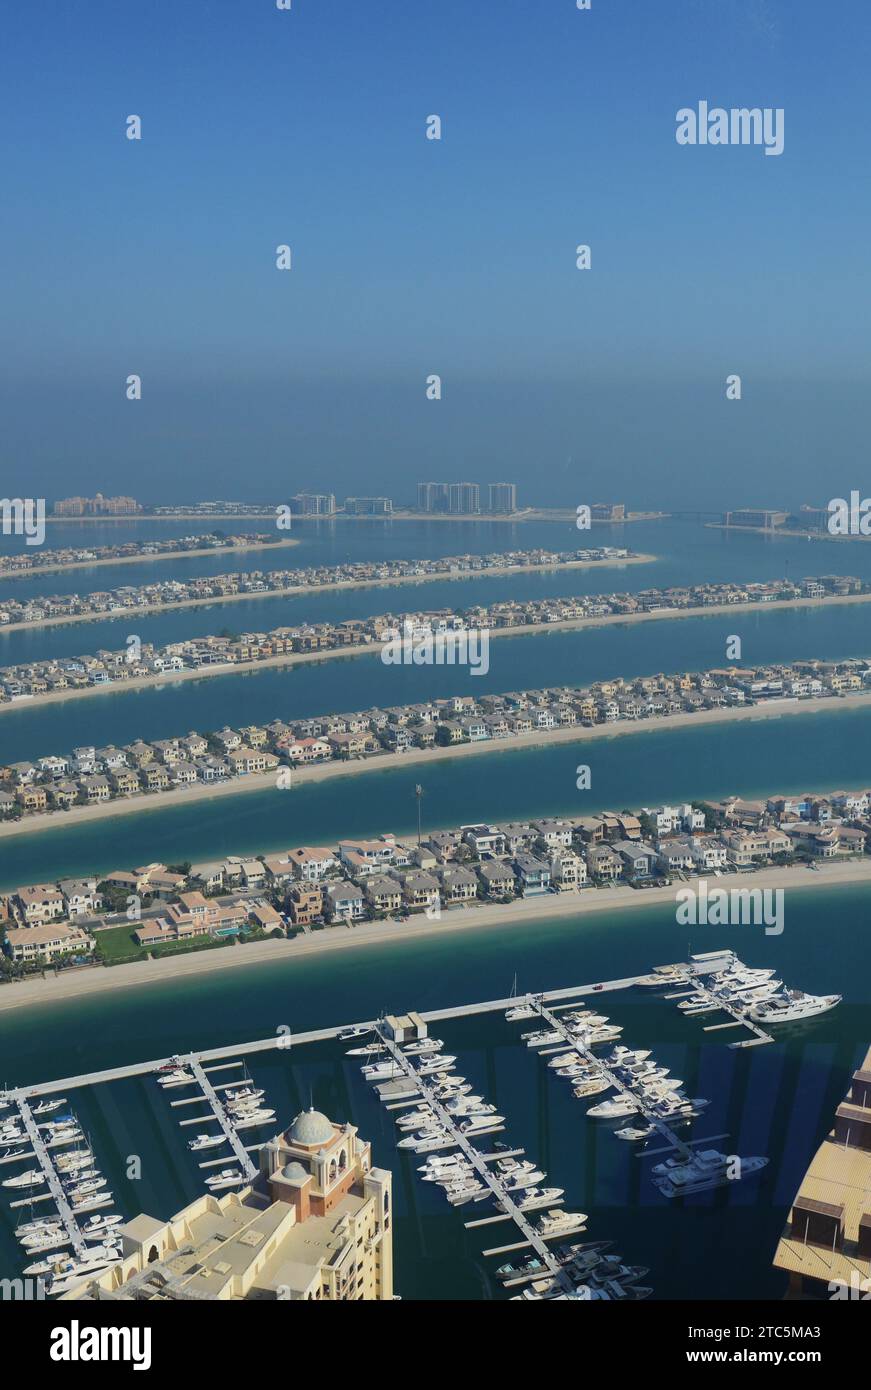 A view of the Palm Jumeirah from the  observation tower - View at t he Palm, Dubai, UAE. Stock Photo